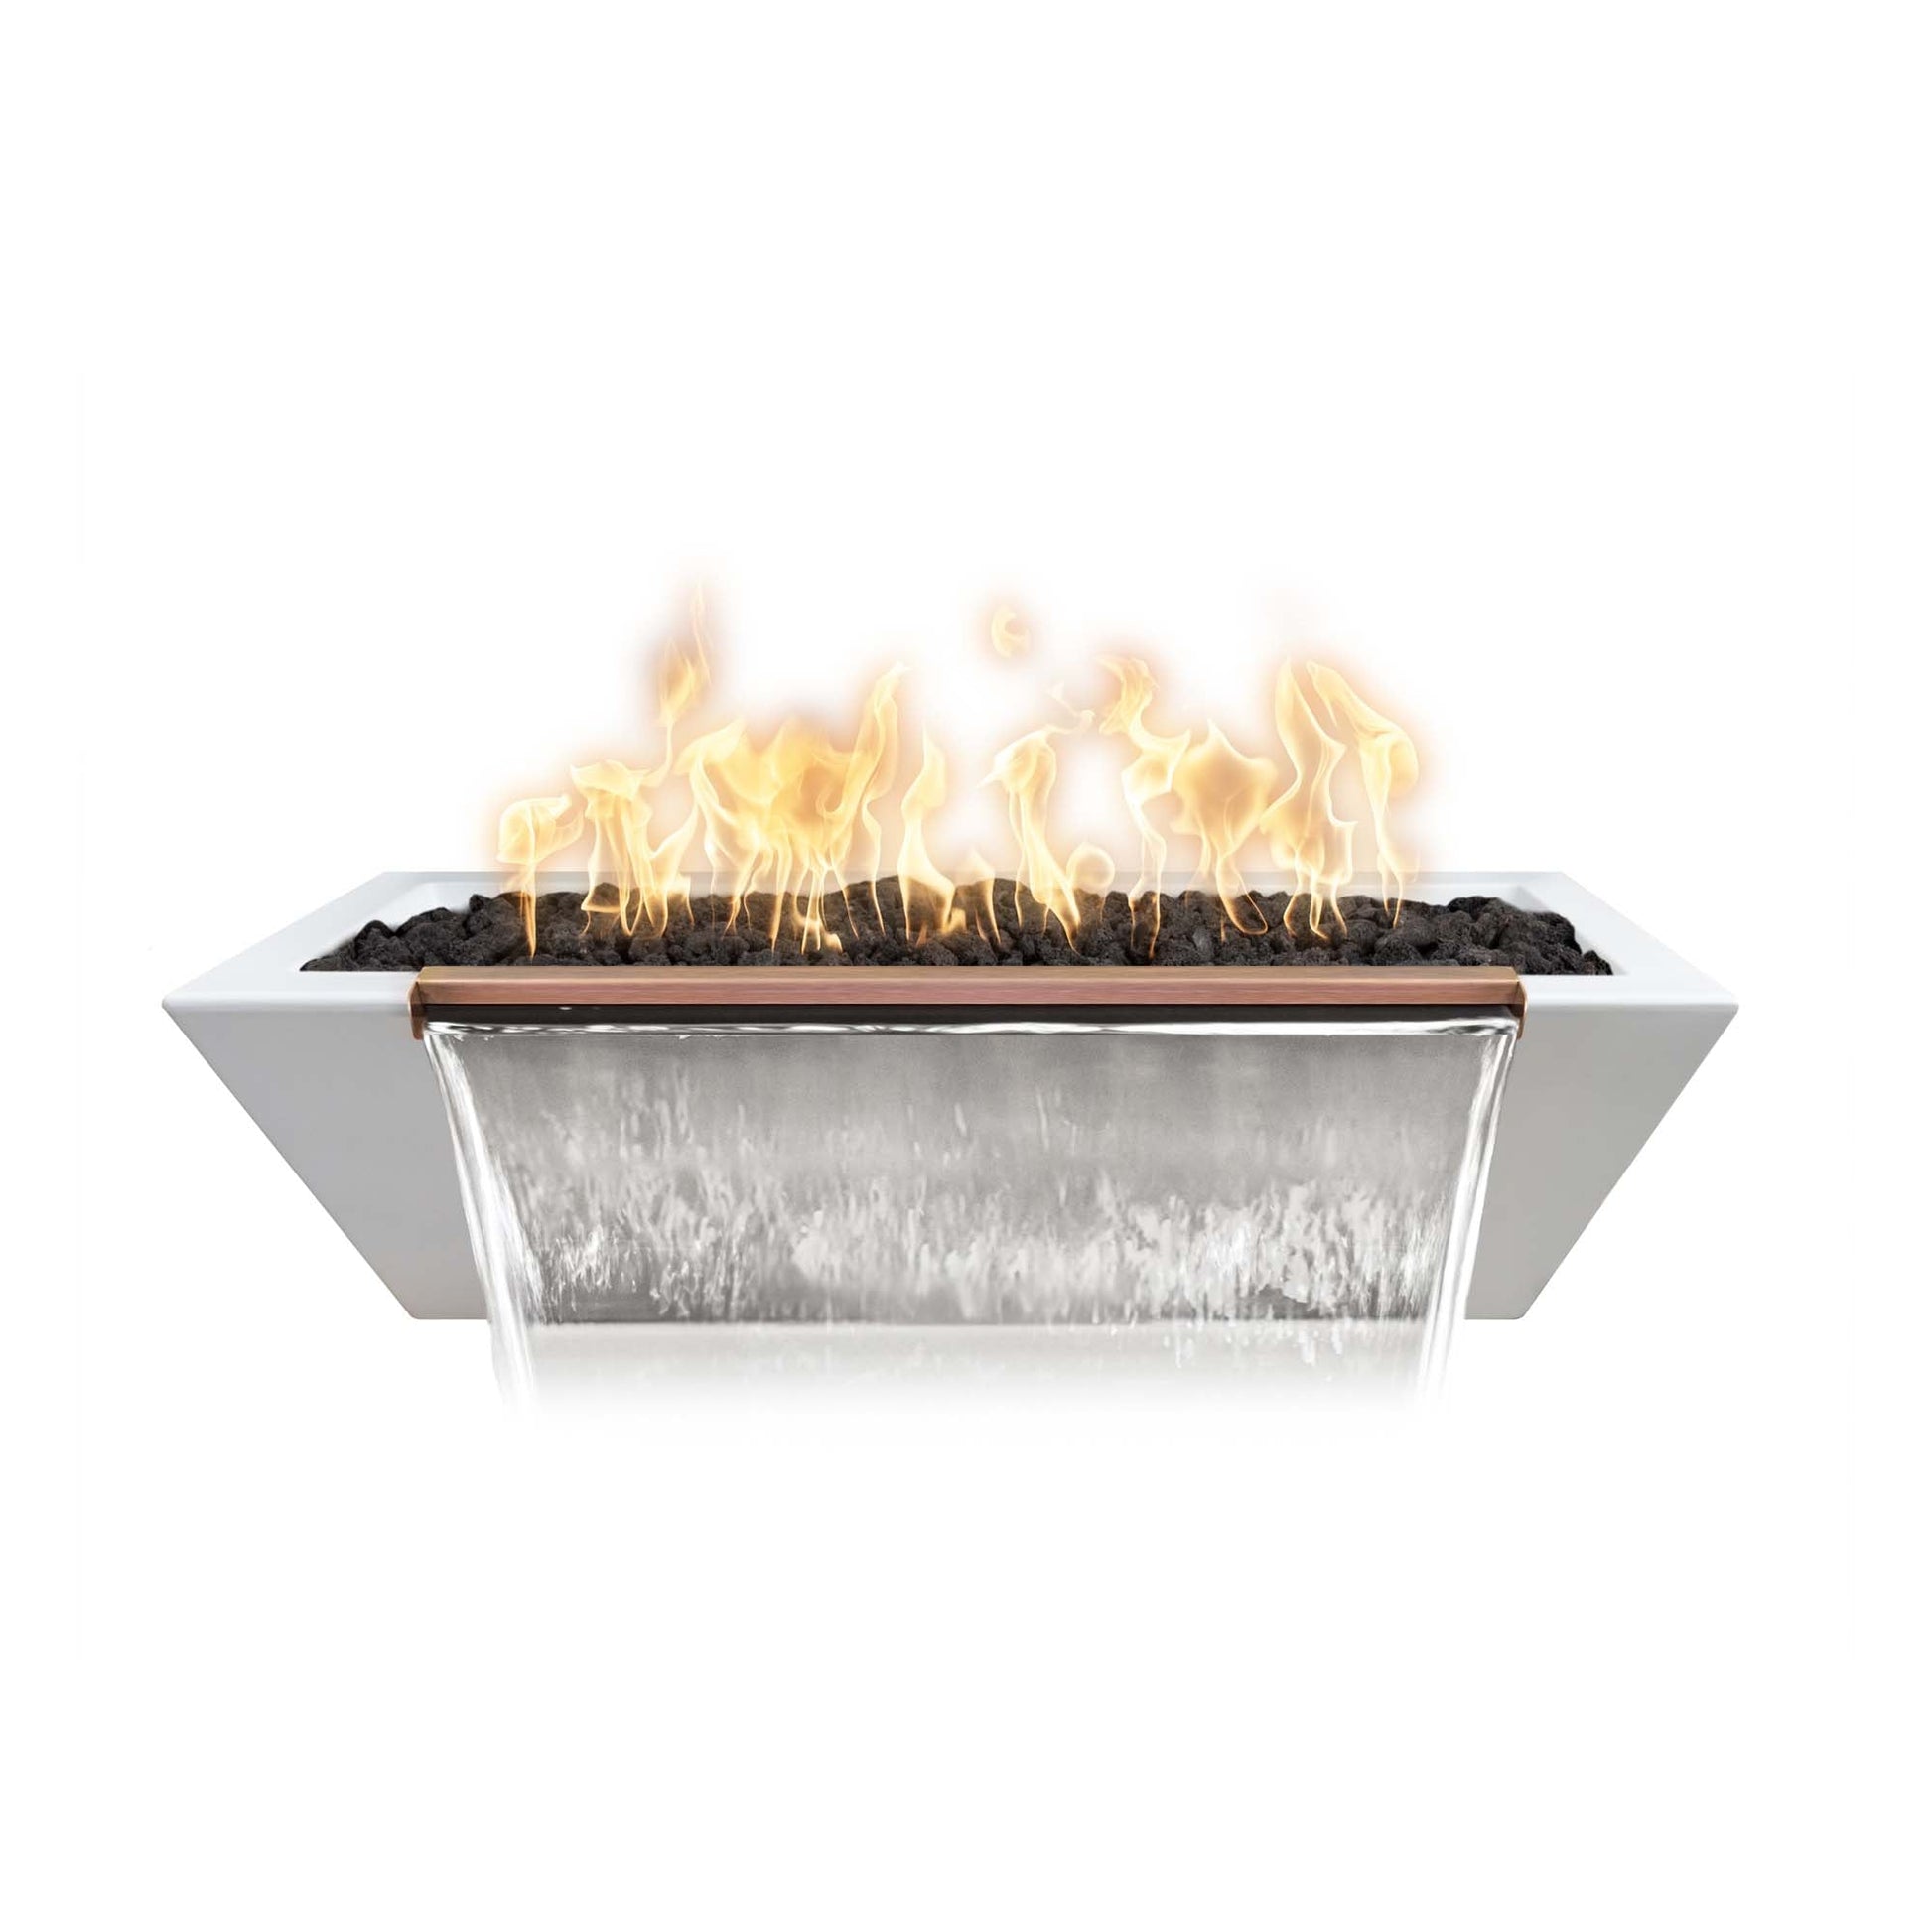 The Outdoor Plus Linear Maya 72" Metallic Bronze GFRC Concrete Natural Gas Fire & Water Bowl with Match Lit Ignition